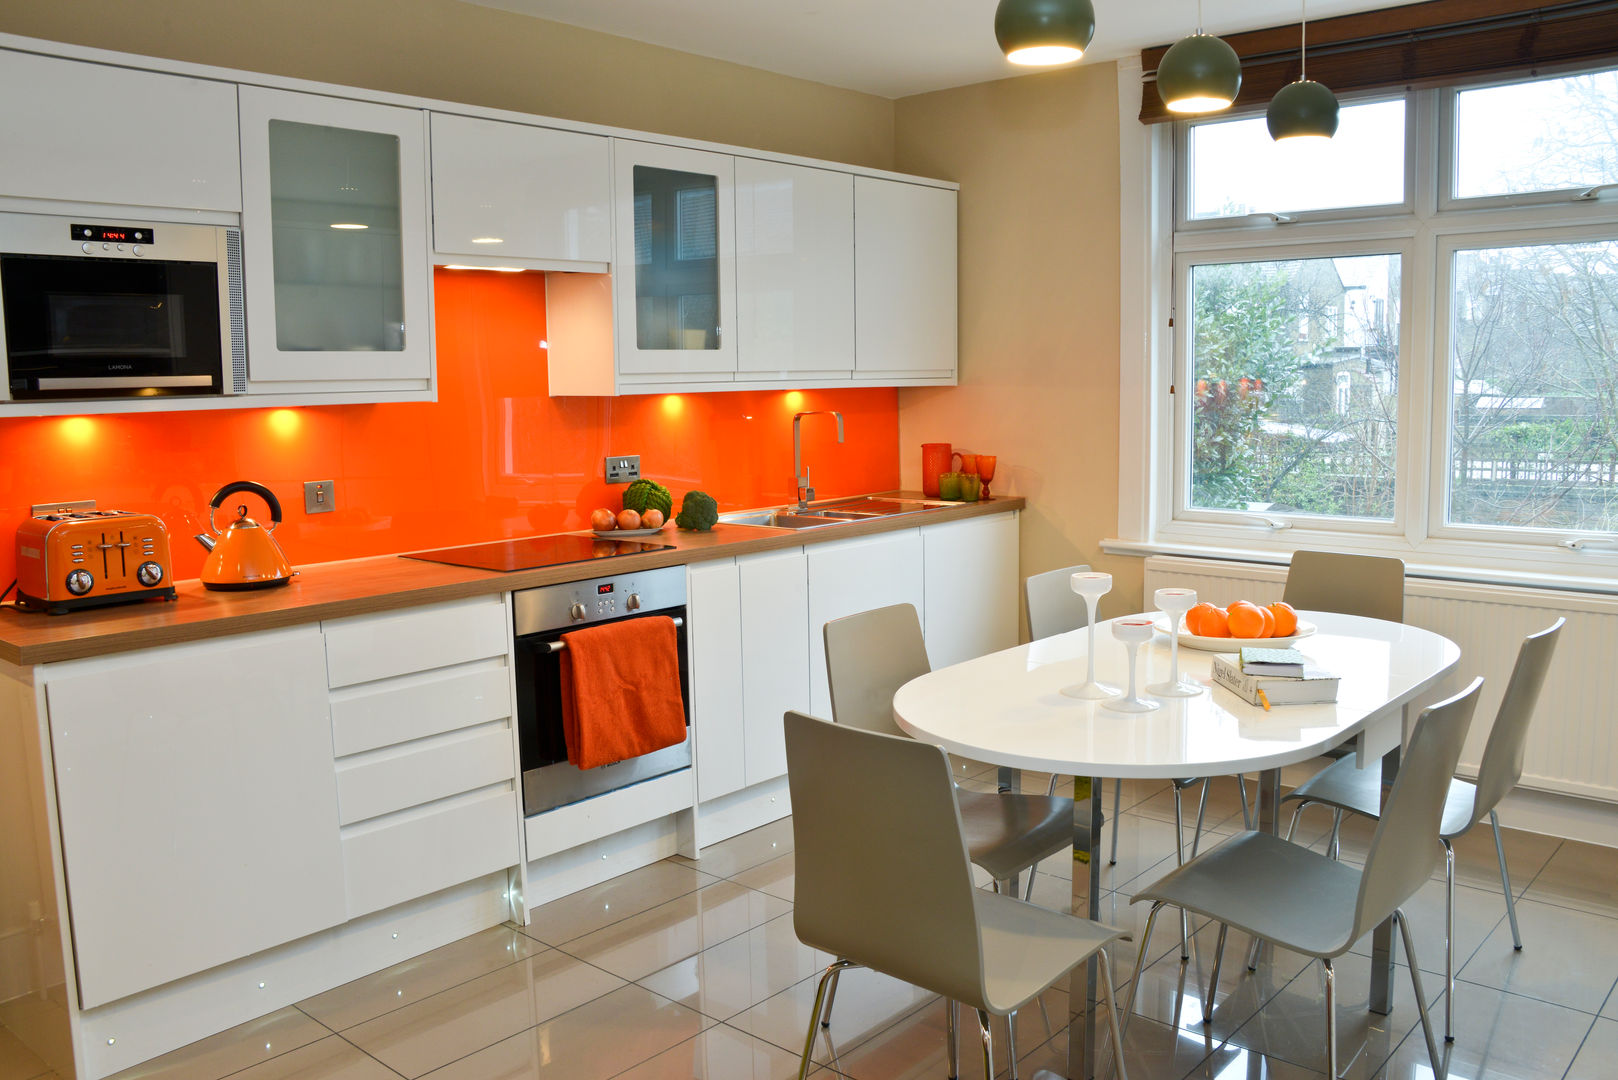 A Bright and Breezy Kitchen, Cathy Phillips & Co Cathy Phillips & Co Moderne Küchen